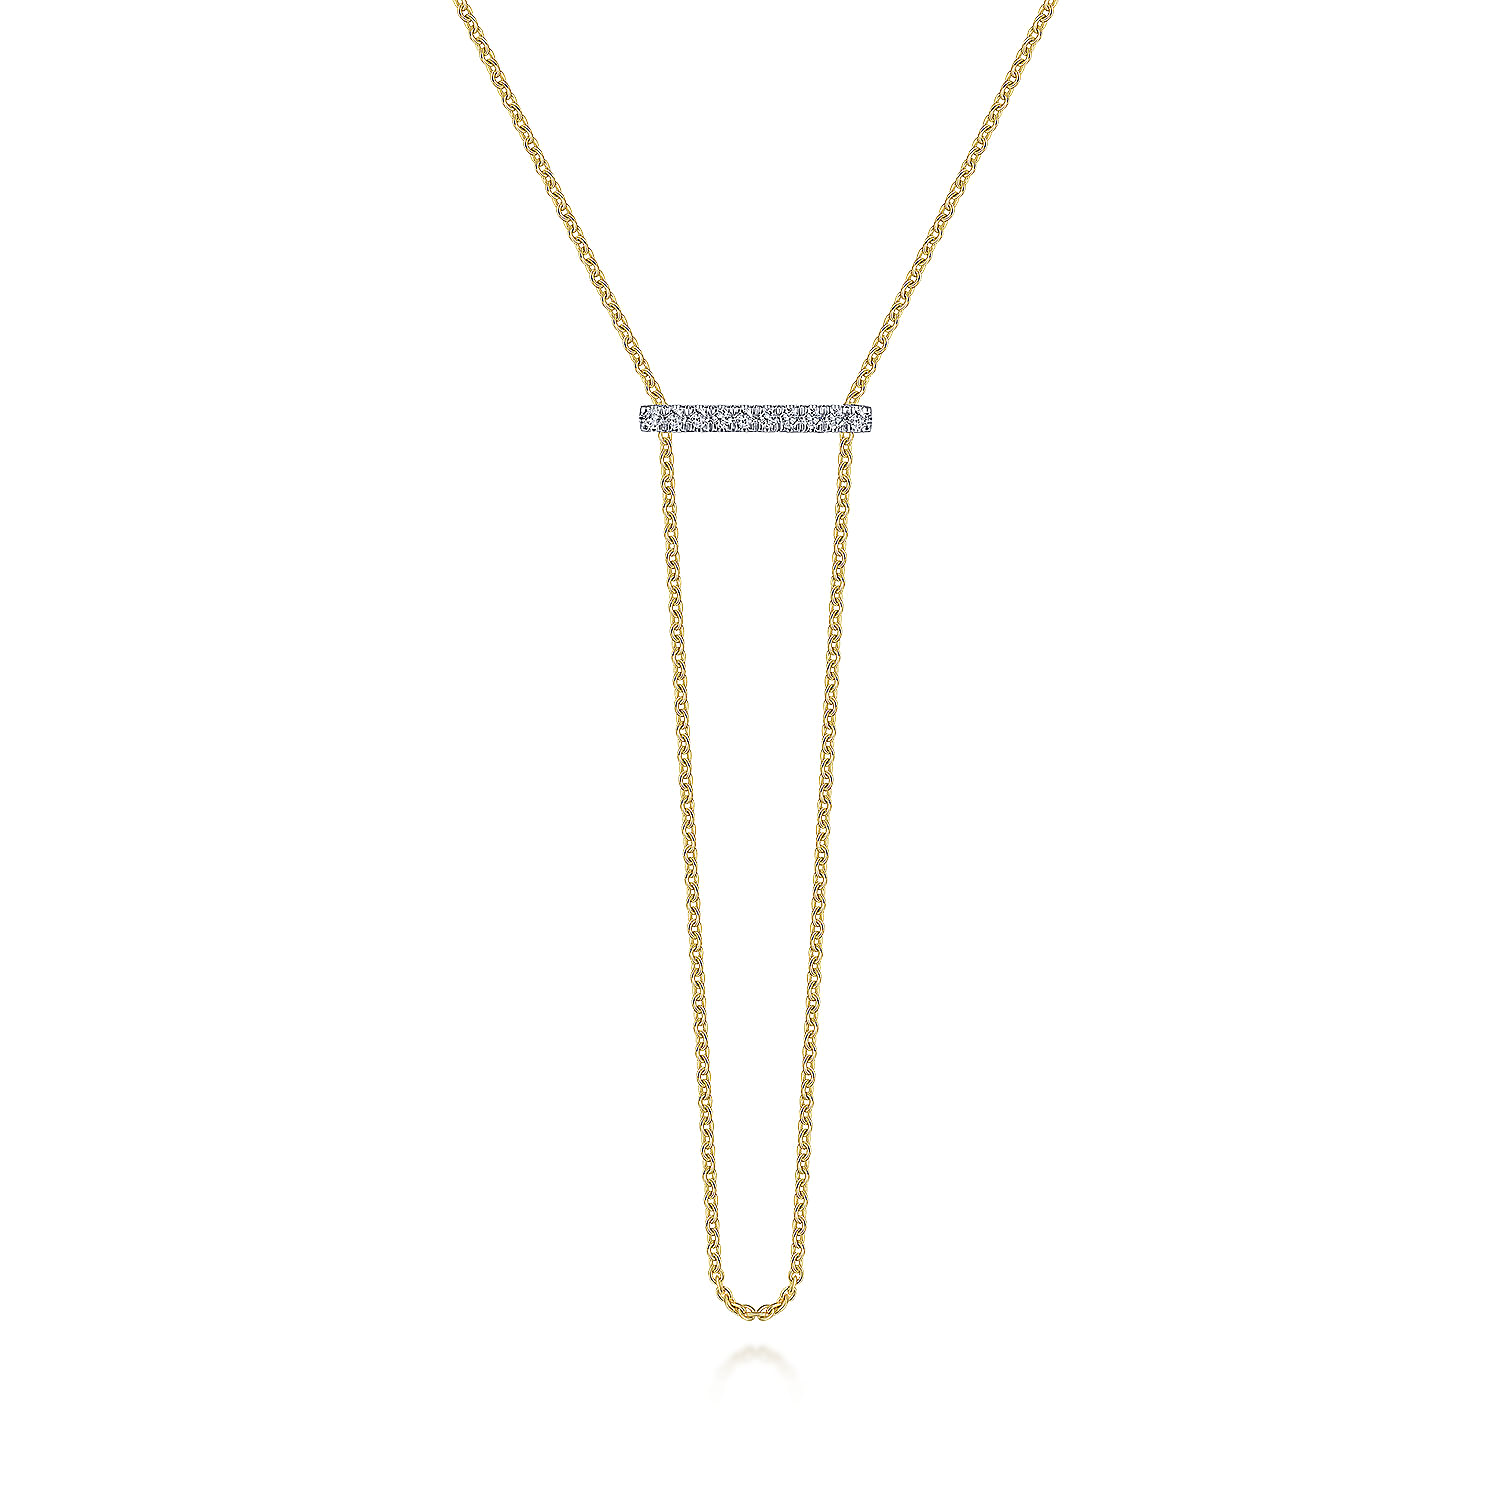 18 inch 14K Yellow White Gold Diamond Bar Necklace with Chain Drop